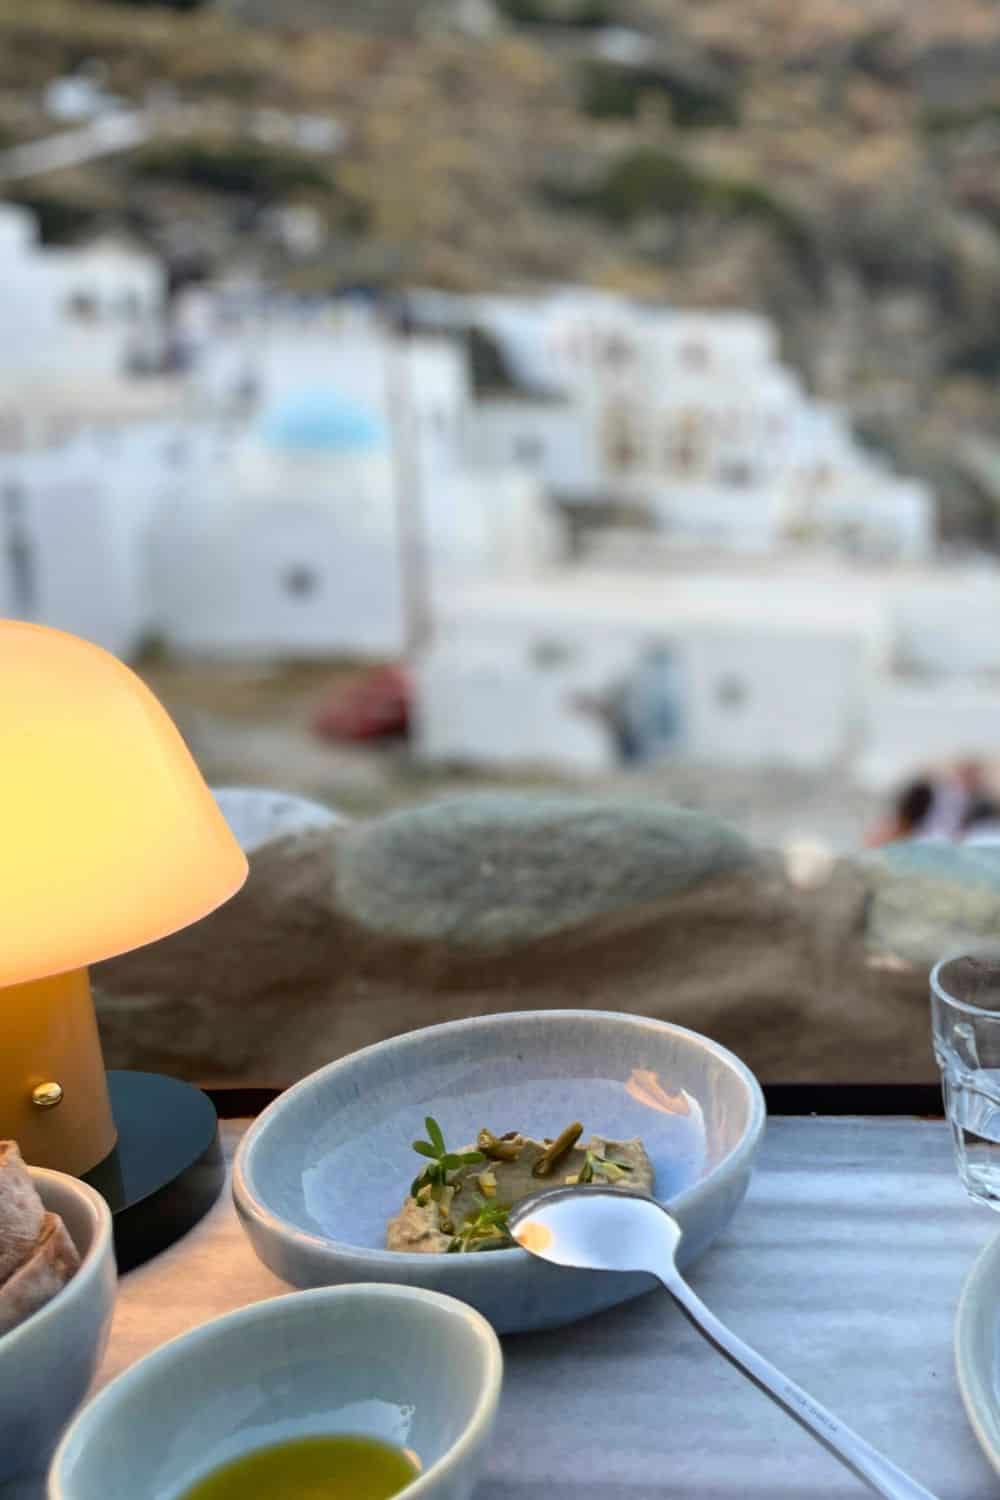 A serene dining table view at dusk, featuring a small bowl with a light appetizer, a dimly lit lamp, and overlooking a picturesque village descending towards the sea.